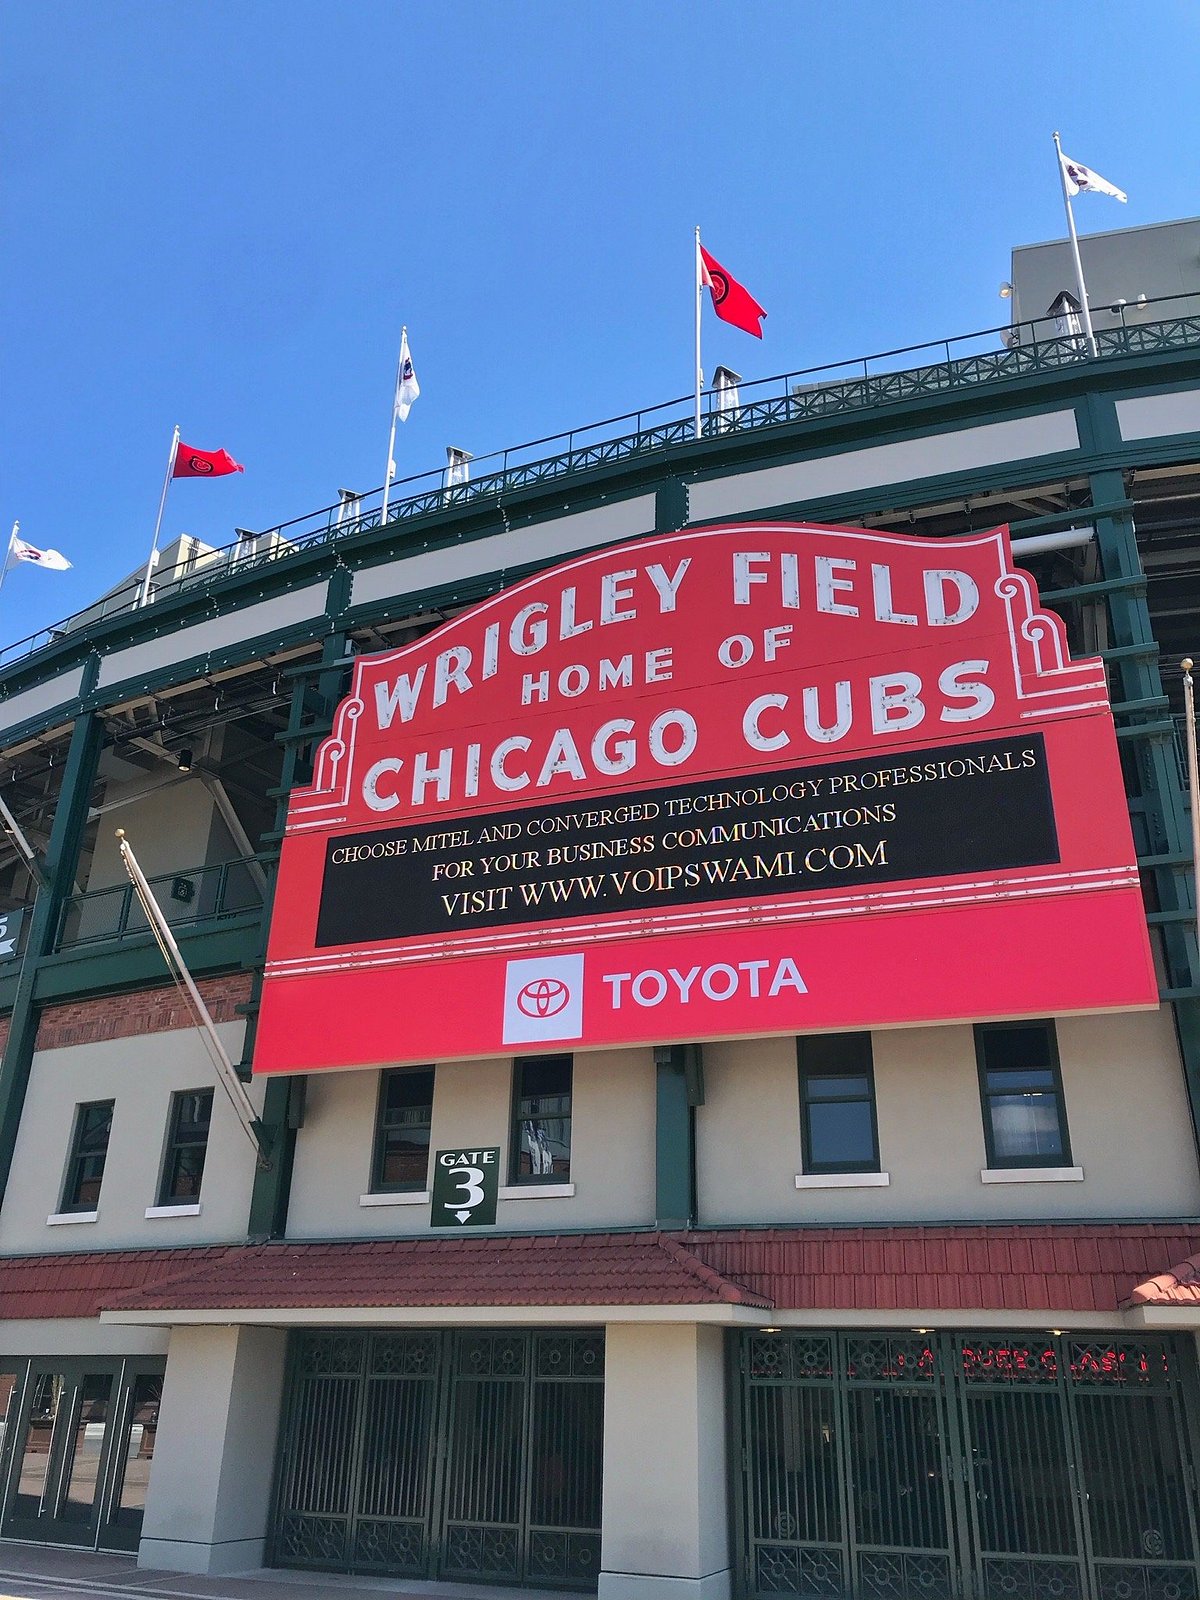 Chicago Cubs, Wrigley Field have the most expensive gameday experience